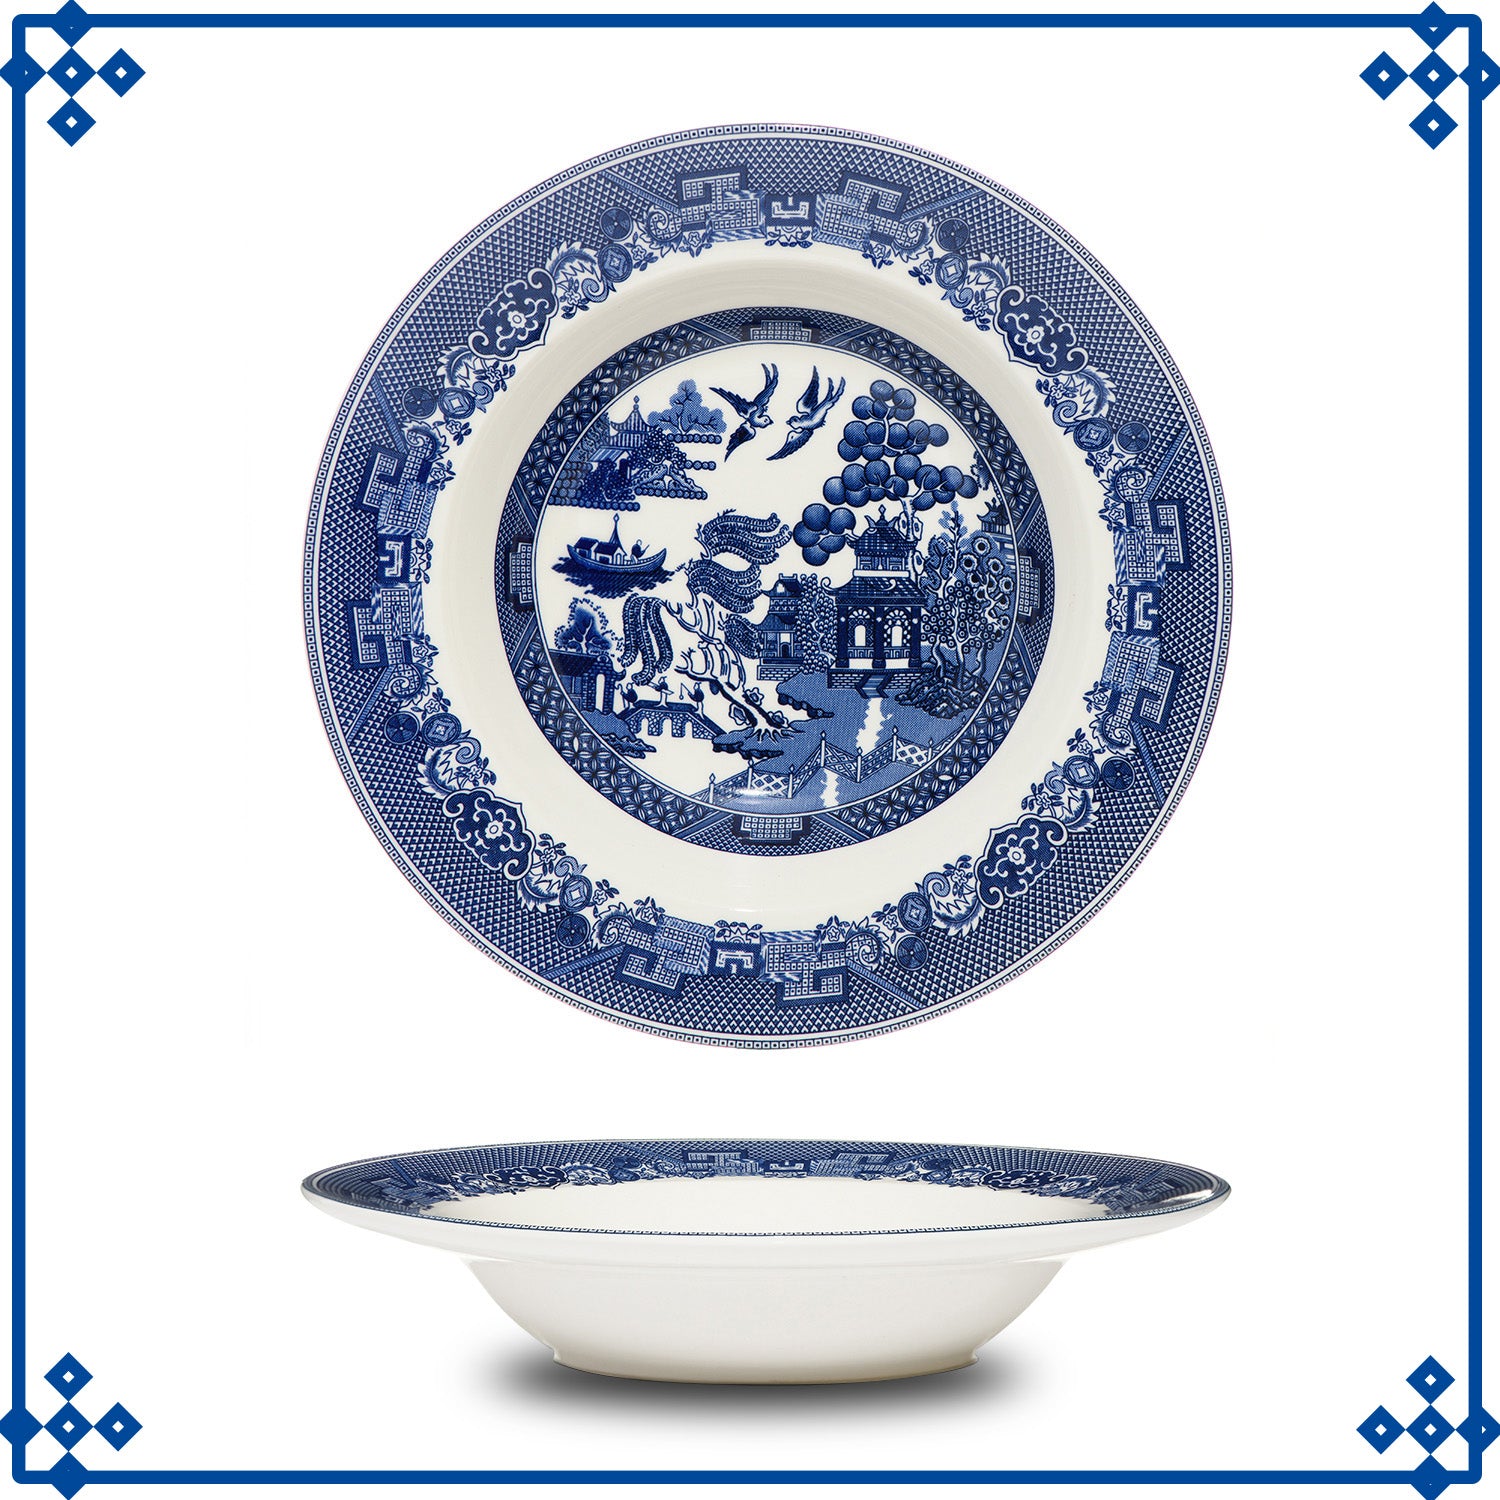 Blue Willow 22cm Soup Plate